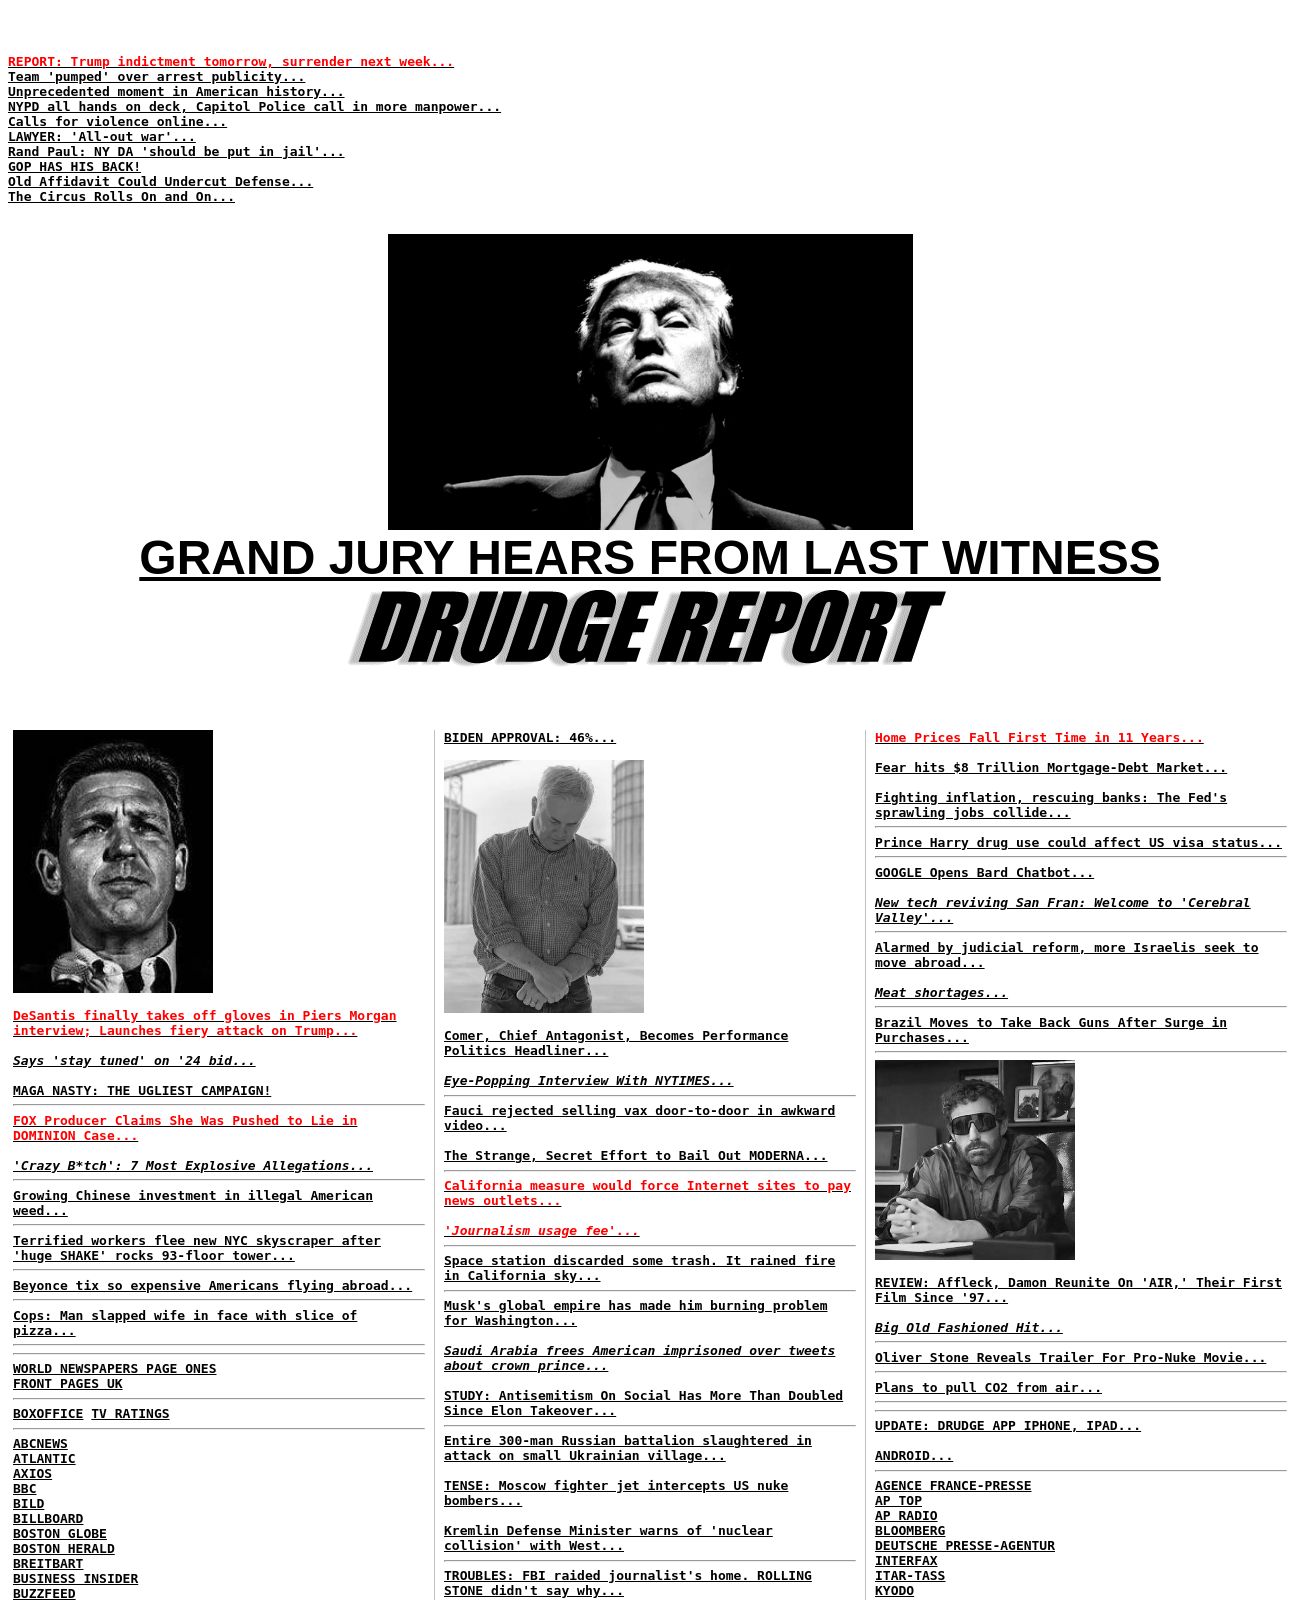 Drudge Report at 2023-03-21 18:44:34-04:00 local time